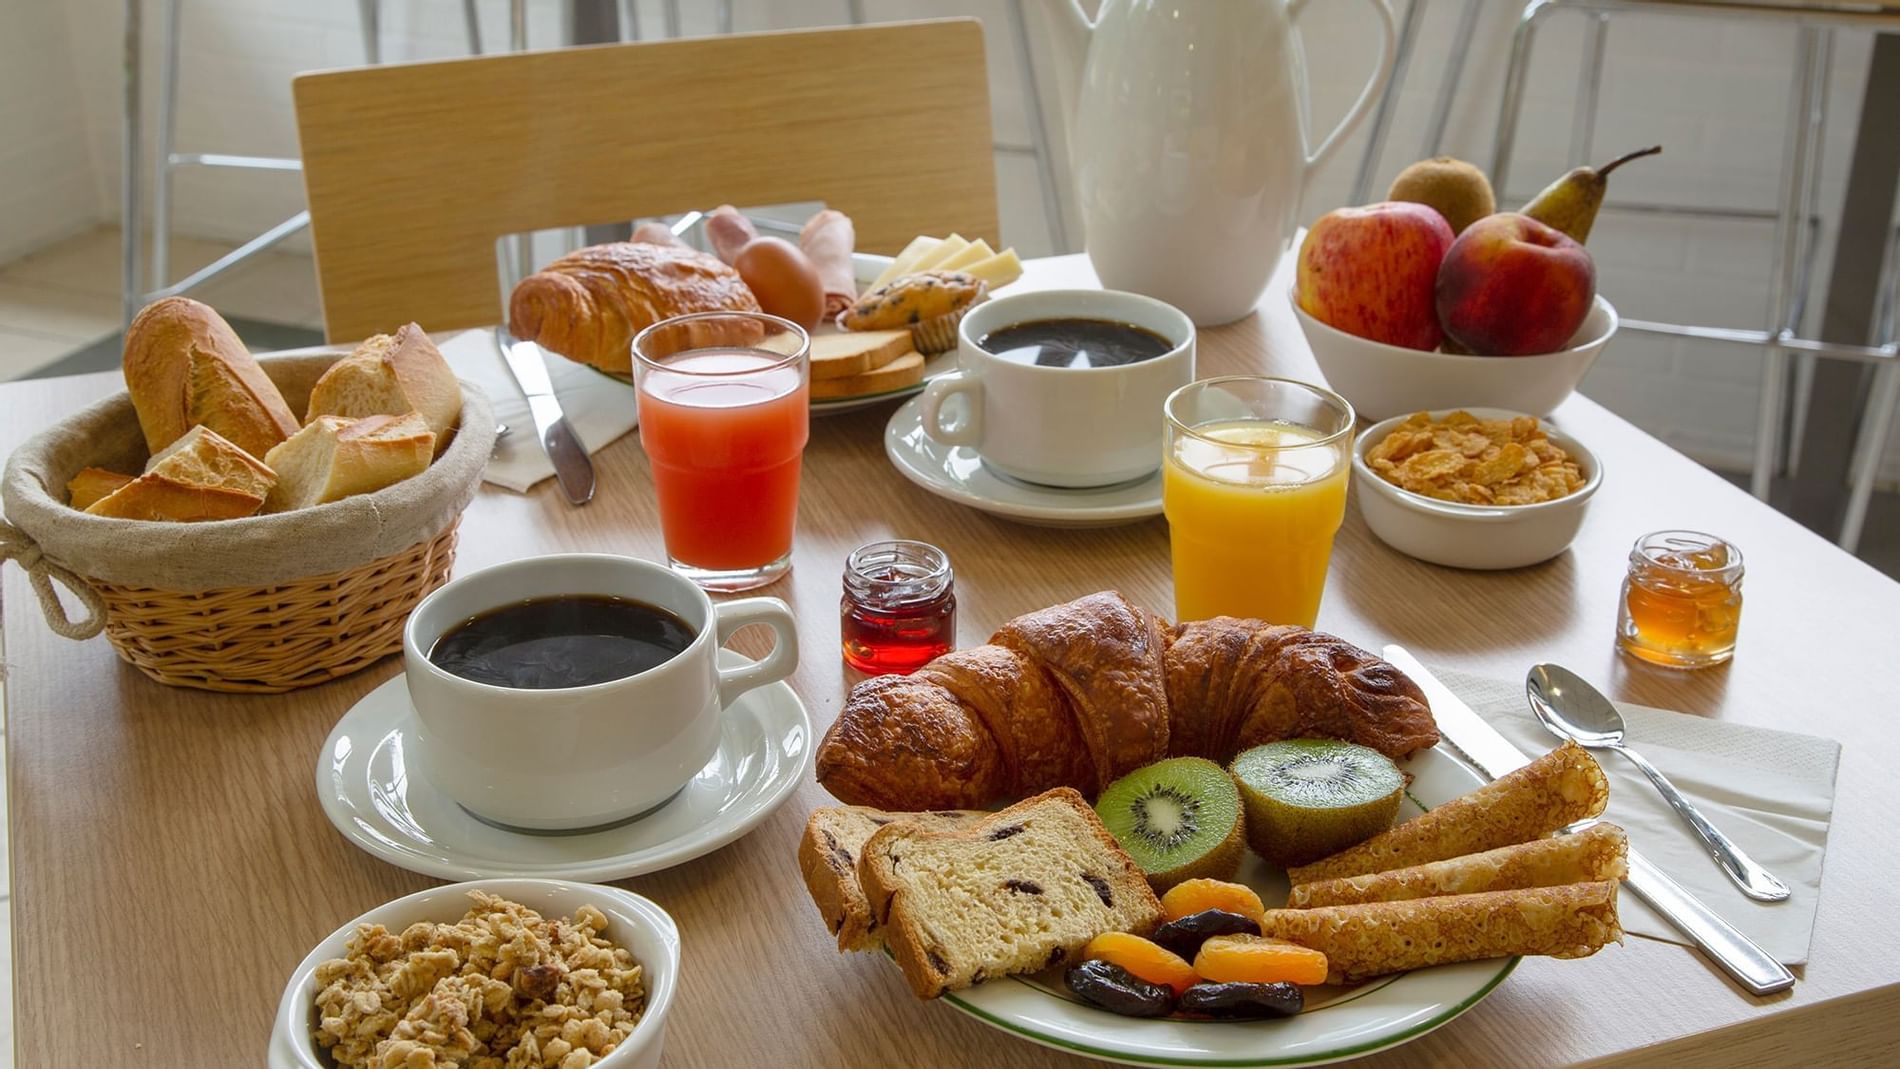 Breakfast with pastry, fruits & drinks at The Originals Hotels